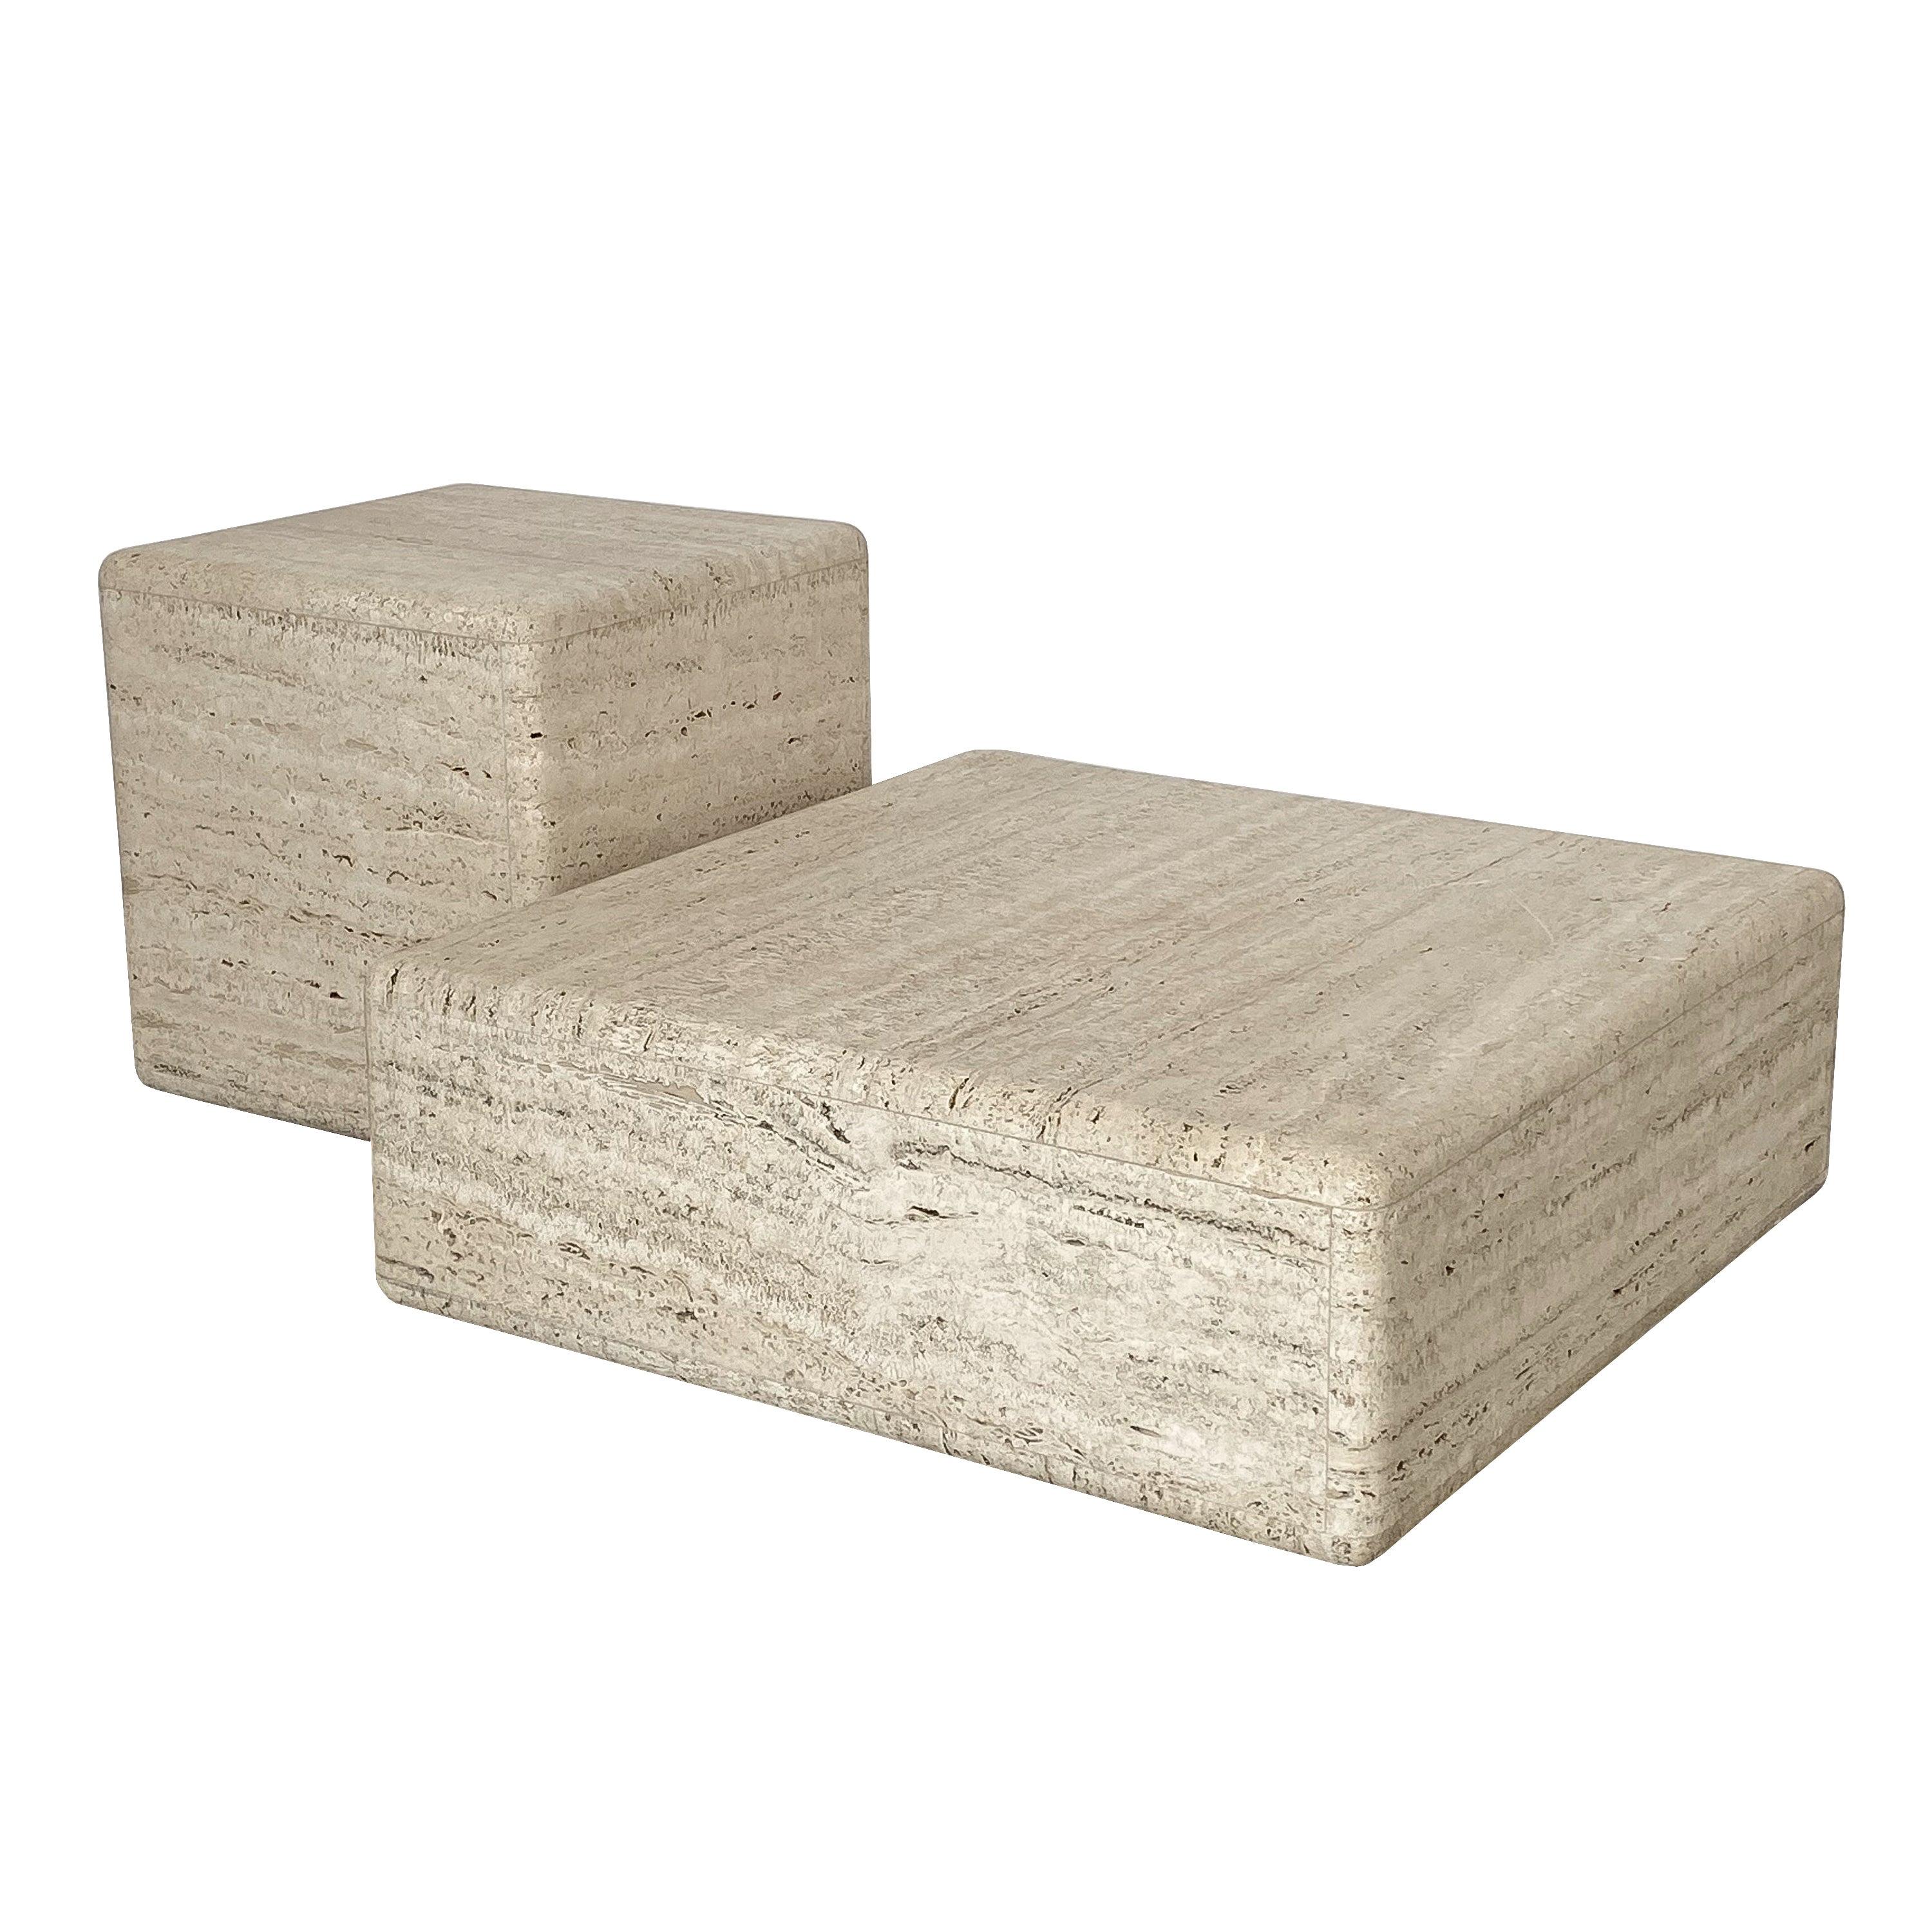 Two-Piece Travertine Cube Tiered Coffee Table